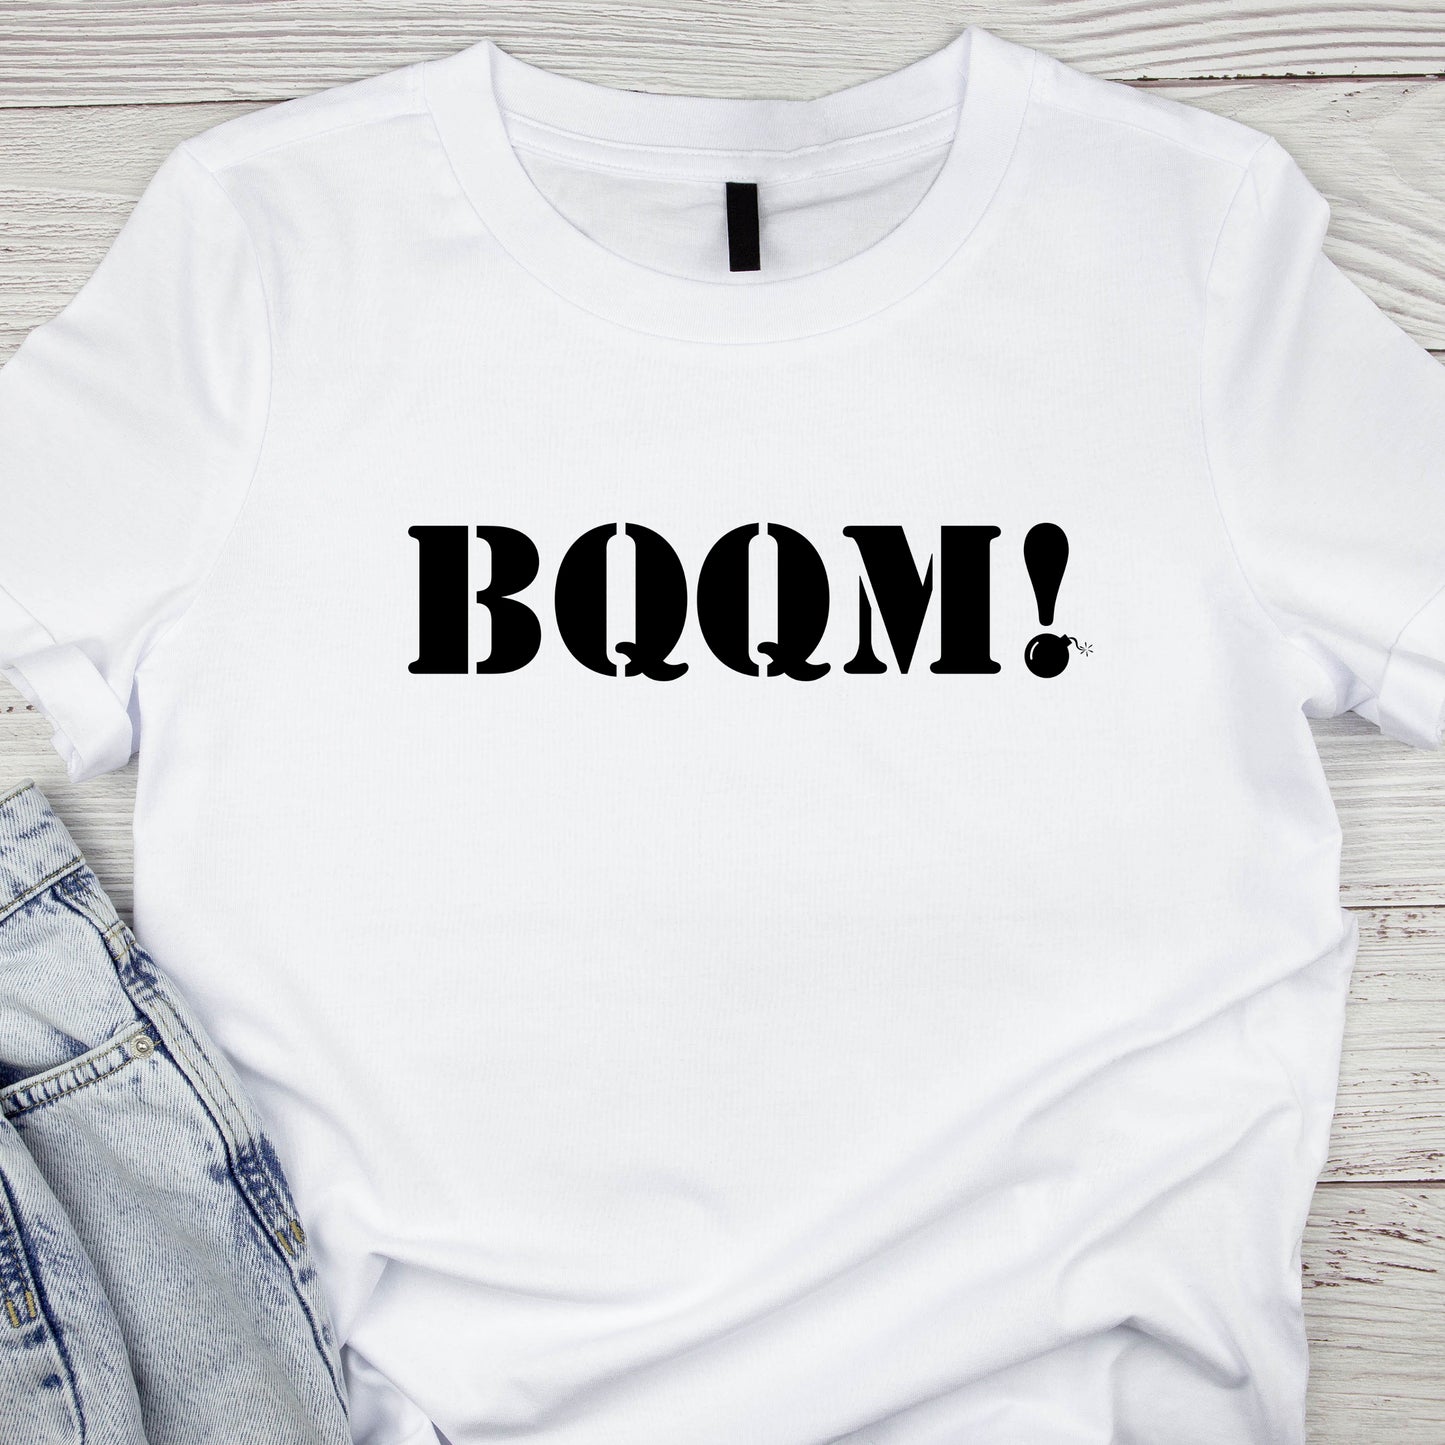 Patriotic Conspiracy T-Shirt BOOM TShirt For ConservativeT  Shirt With Q Shirt For Political T-Shirt With Bomb Shirt For Conservative Gift